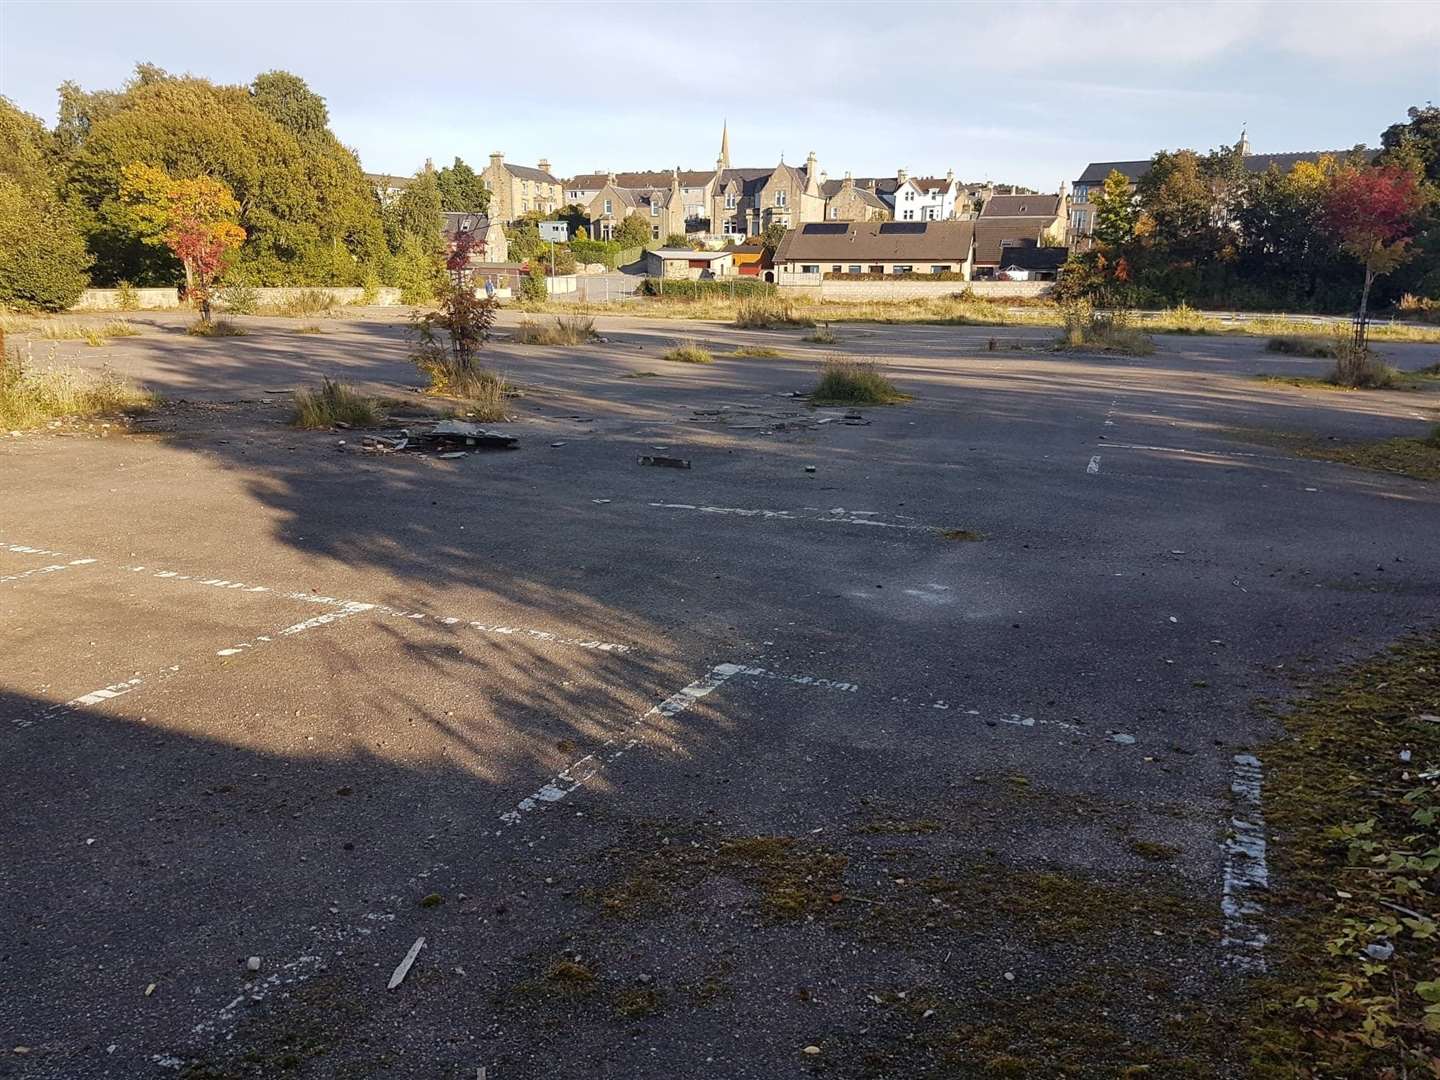 The site has been left derelict for nearly two decades.